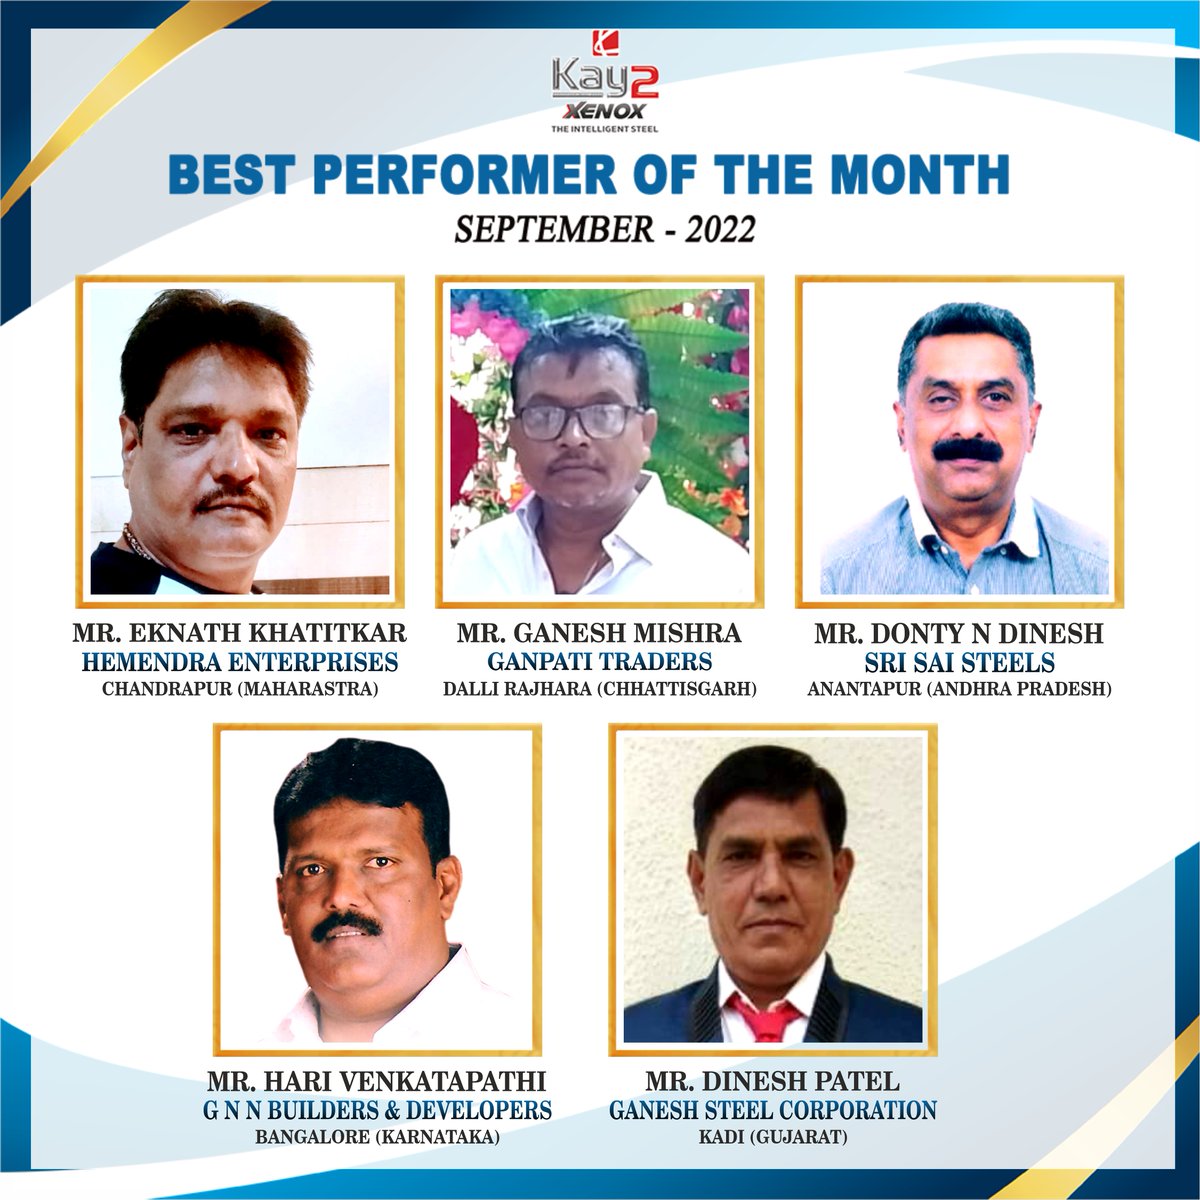 We, at Kay2 Xenox, are proud to announce our Best Performers for September 2022, for achieving great success in their respective business areas.
#DealerOfTheMonth #BestPerformer #Kay2Xenox #Kay2Steel